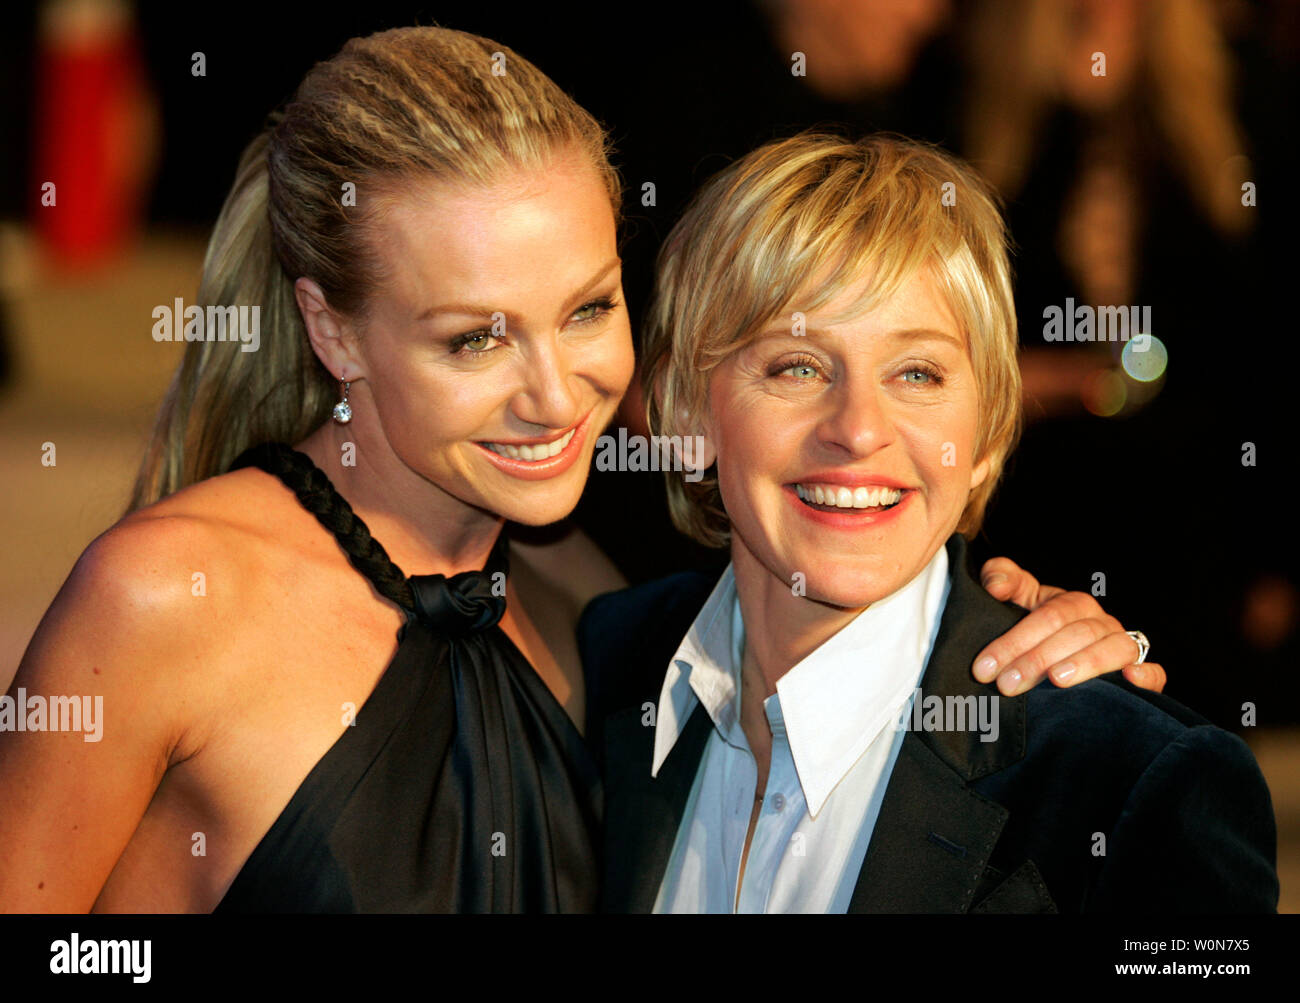 Oscar Host Ellen DeGeneres (R) and Portia de Rossi arrive at the Vanity Fair post-79th Academy Awards party at Morton's in West Hollywood on February 25, 2007.   (UPI Photo/Gary C. Caskey) Stock Photo